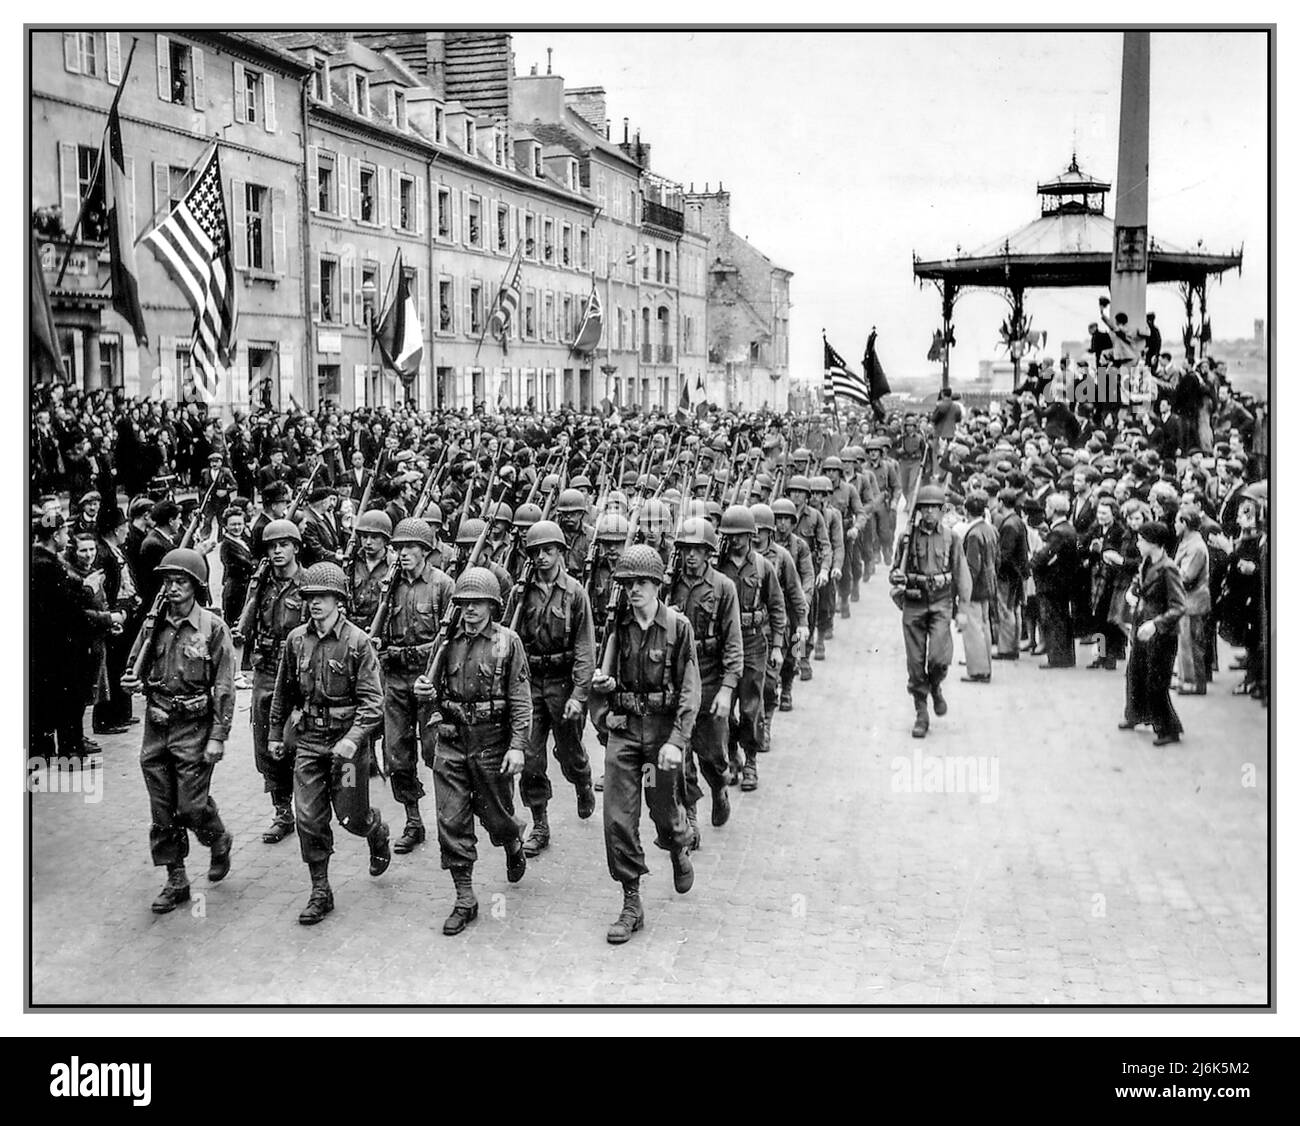 WW2 LIBERATION FRANCE NAZIS CHERBOURG  American troops march through Place de la Republique after D-Day to the cheers and waves of the local French population Cherbourg , France June 27, 1944. World War II Second World War Stock Photo